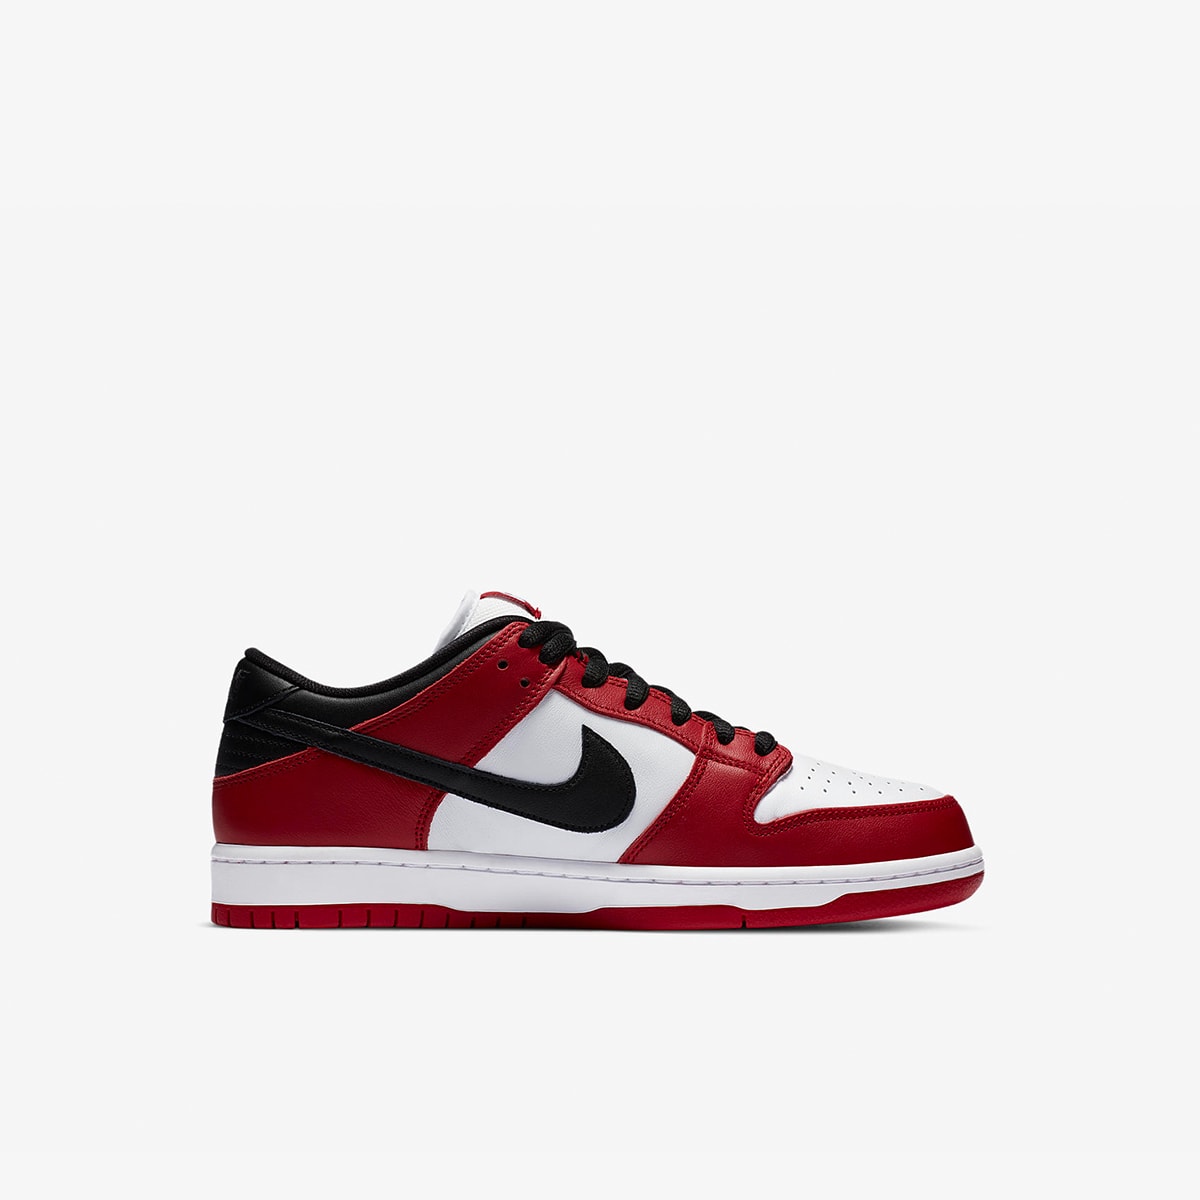 Nike SB Dunk Low Pro Chicago (Red, Black & White) | END. Launches